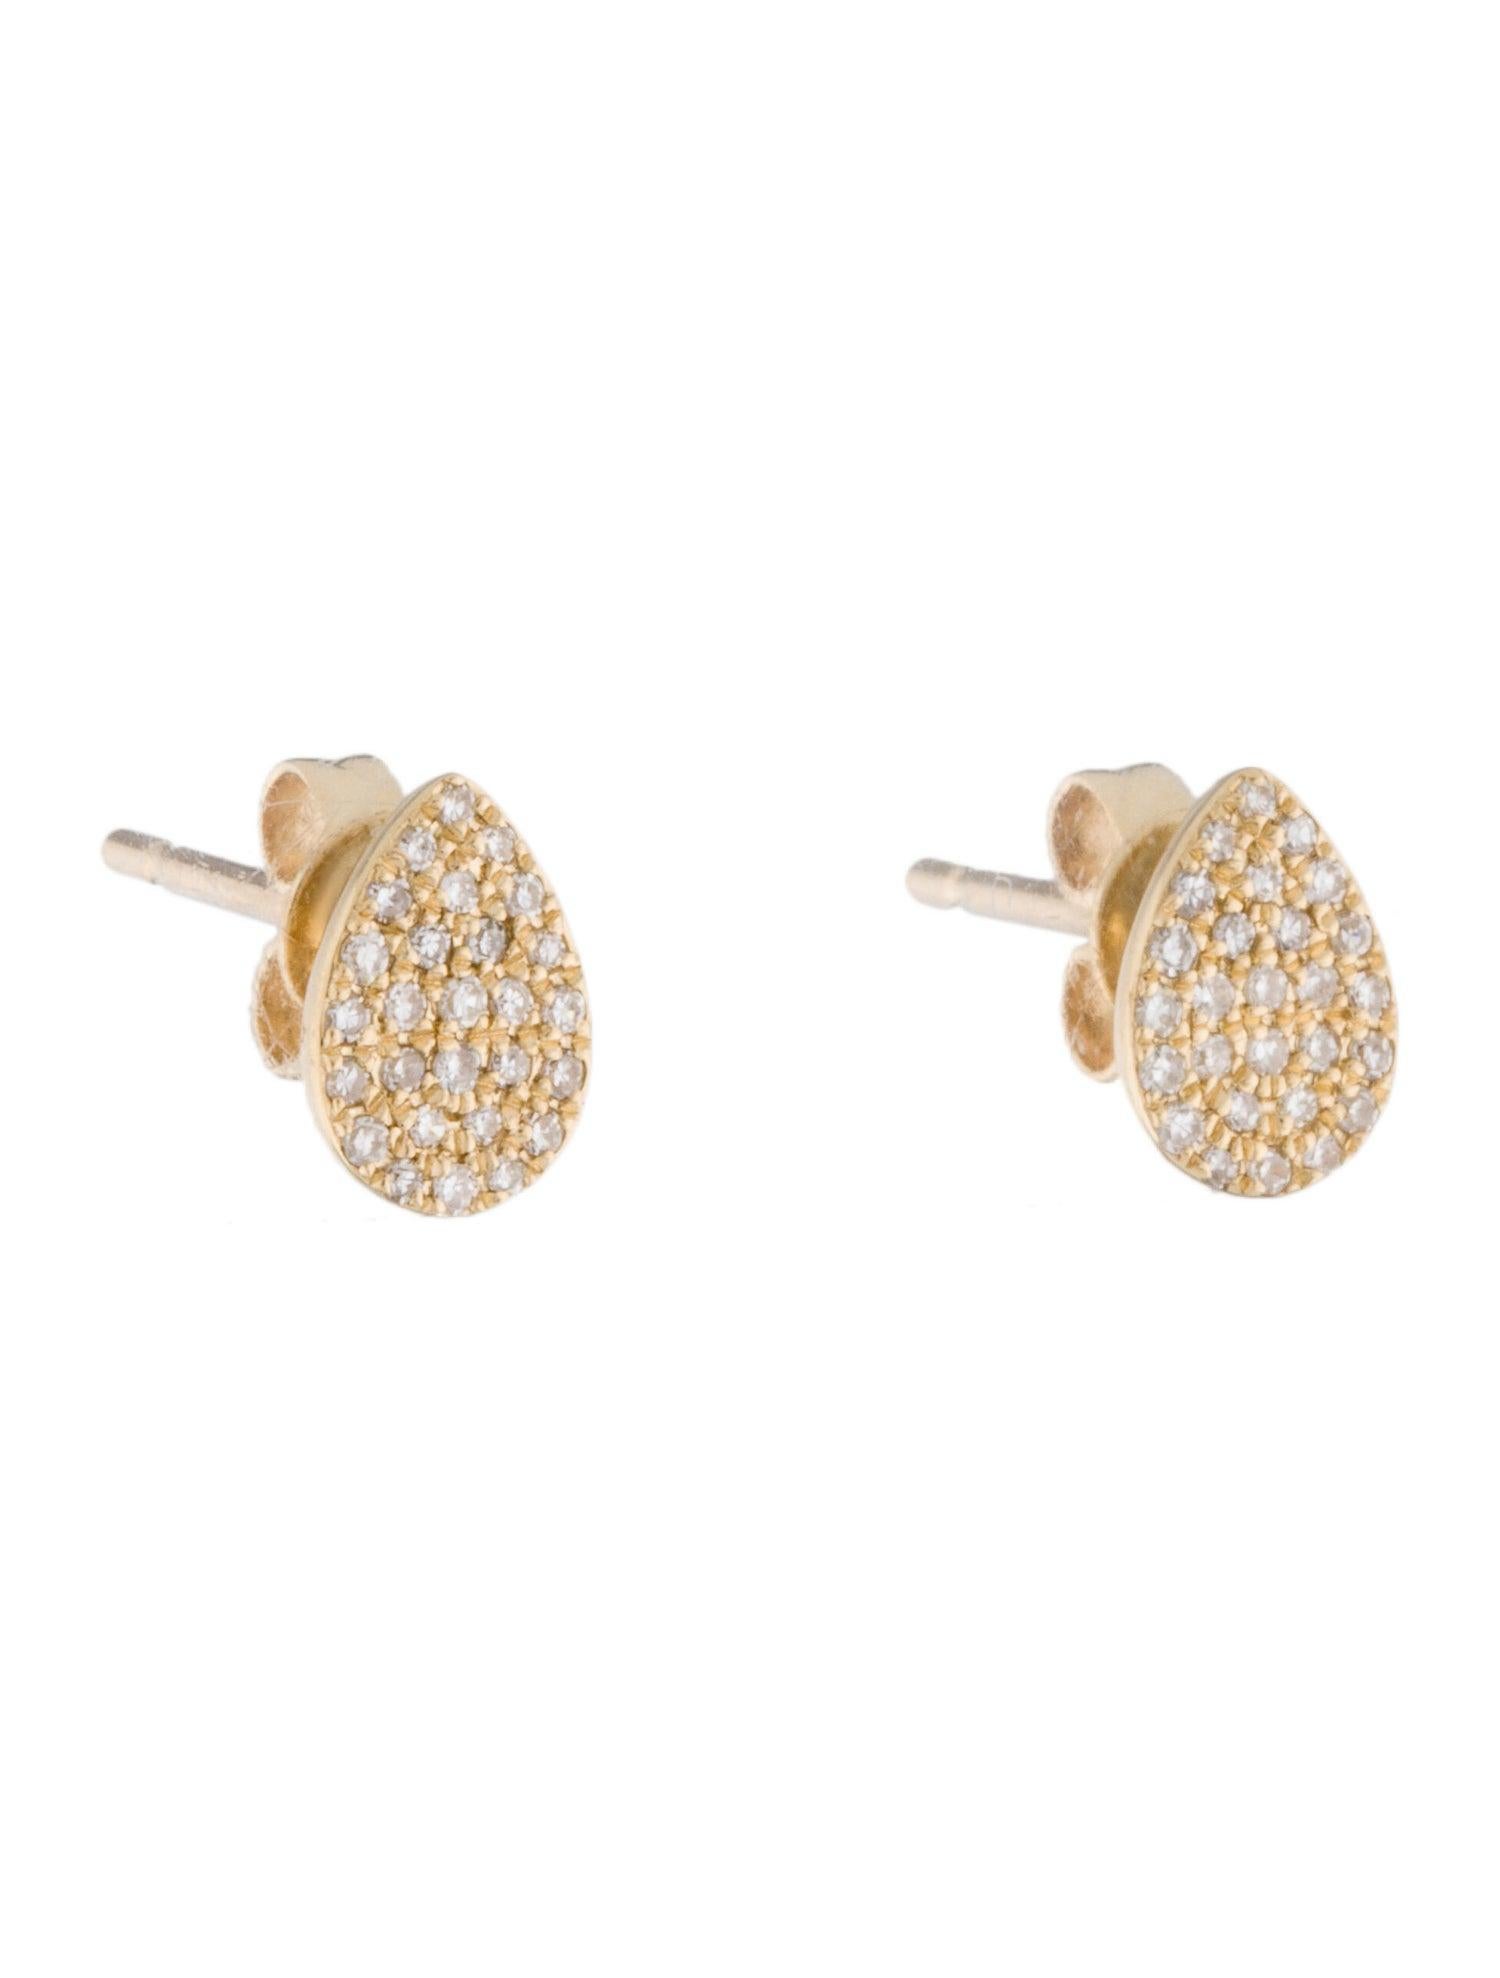 Contemporary 14K Yellow Gold Diamond Pave Pear Shape Stud Earrings for Her For Sale